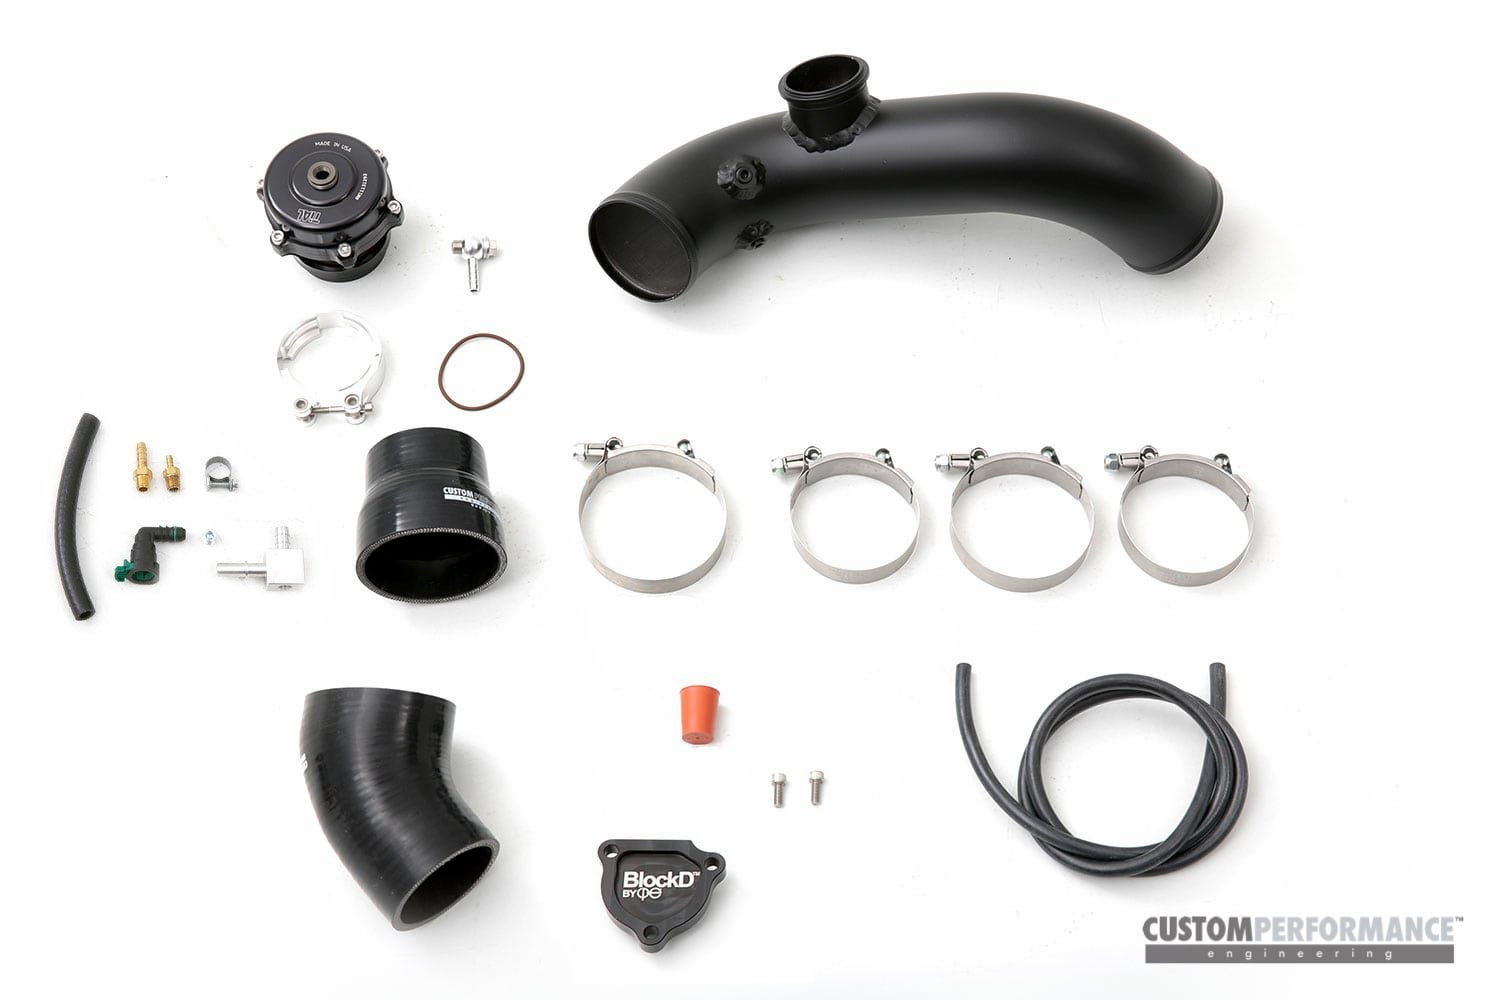 CP-E Mustang Ecoboost "Exhale" Cold-Side Intercooler Hard-Pipe with TIAL BOV Kit